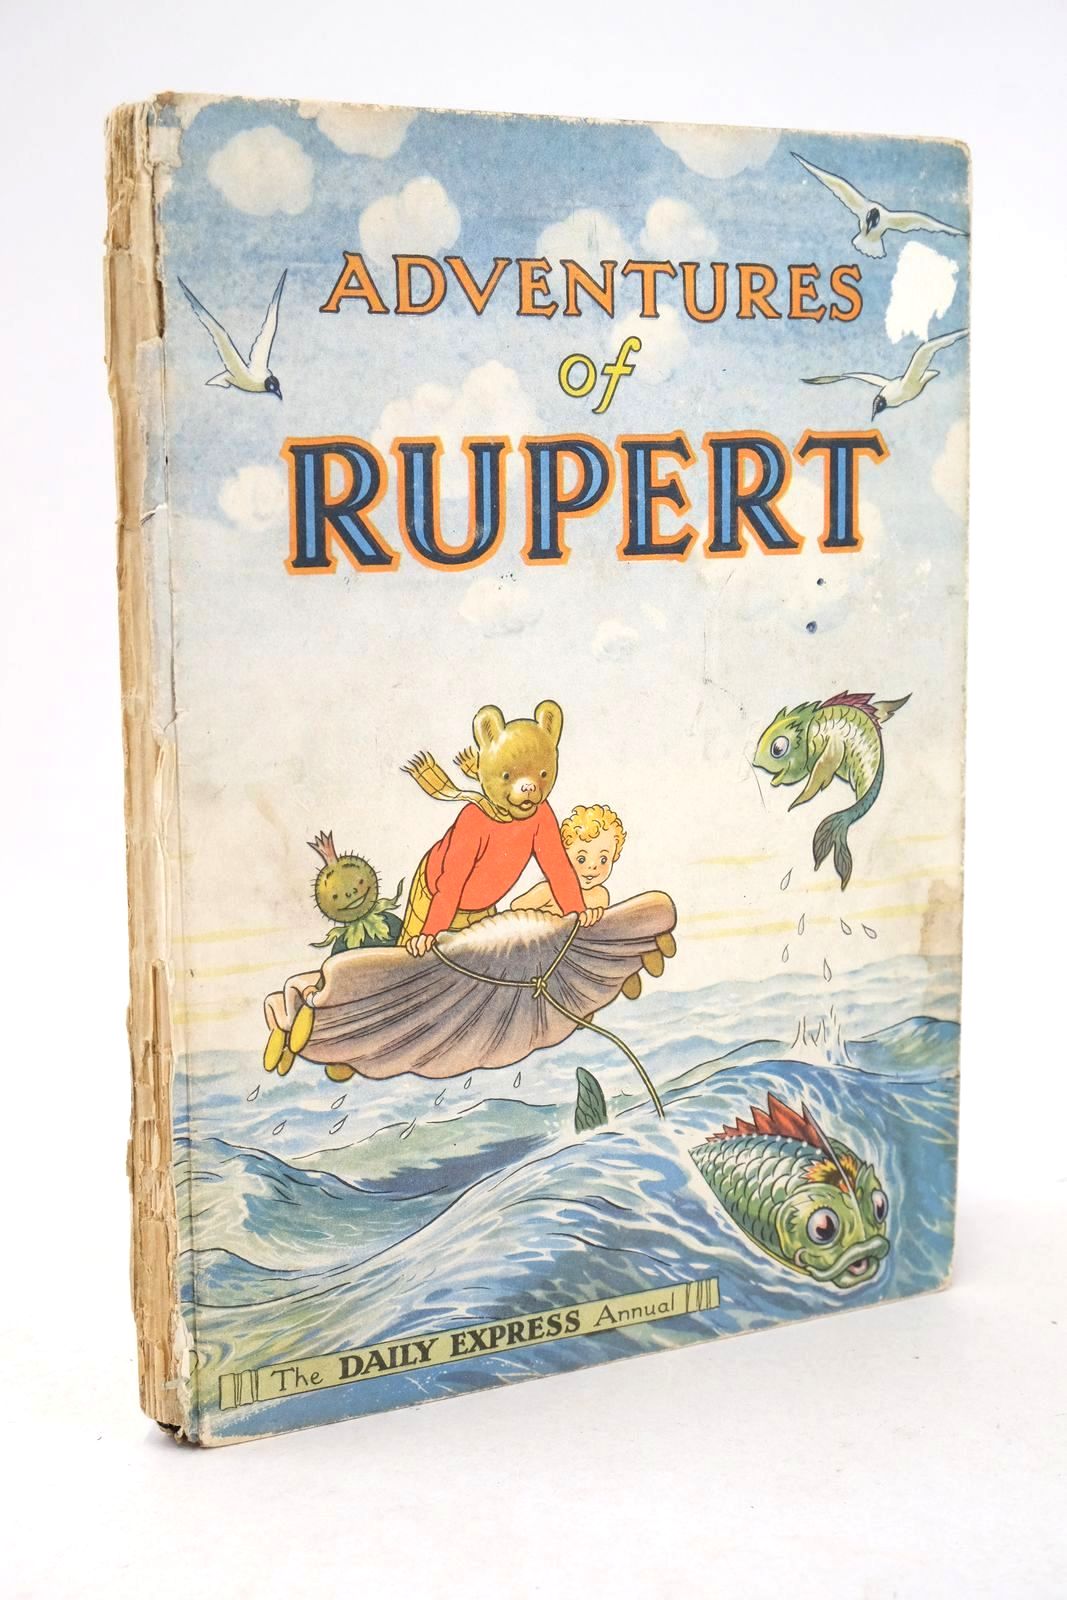 Photo of RUPERT ANNUAL 1950 - ADVENTURES OF RUPERT written by Bestall, Alfred illustrated by Bestall, Alfred published by Daily Express (STOCK CODE: 1325978)  for sale by Stella & Rose's Books